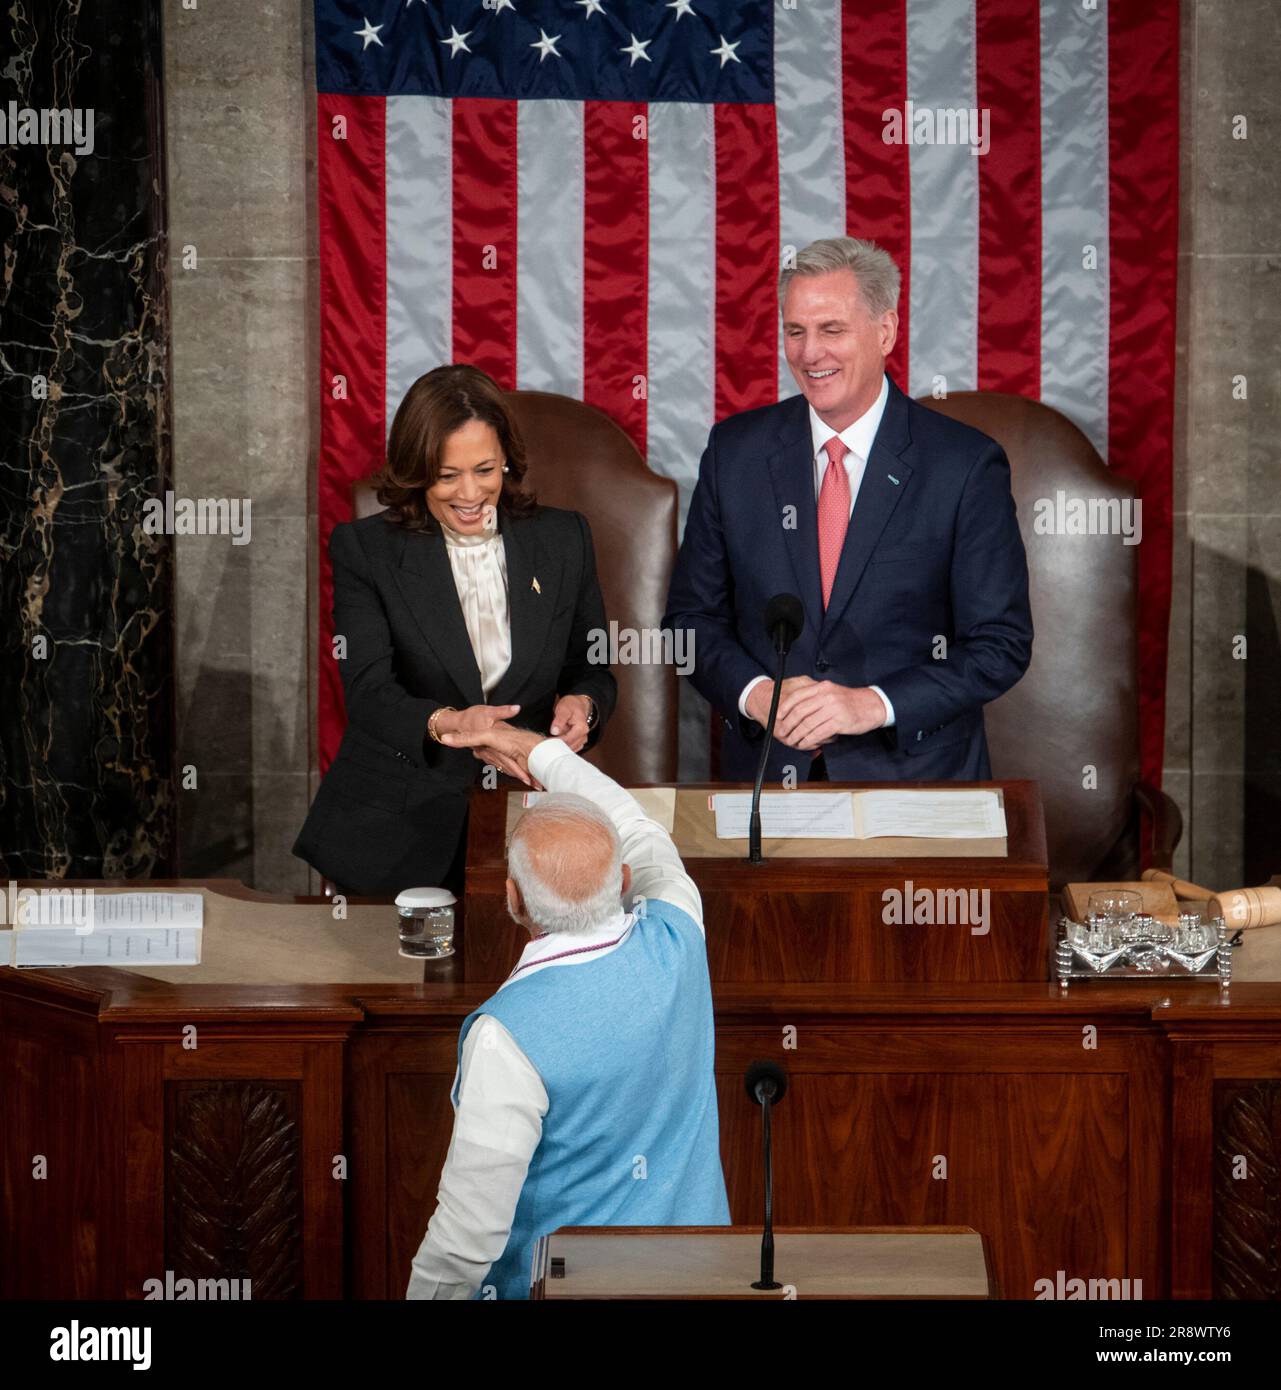 https://c8.alamy.com/comp/2R8WTY6/washington-united-states-22nd-june-2023-prime-minister-of-india-narendra-modi-center-is-greeted-by-united-states-vice-president-kamala-harris-lefty-and-speaker-of-the-united-states-house-of-representatives-kevin-mccarthy-republican-of-california-right-as-he-arrives-for-a-joint-address-to-congress-at-the-us-capitol-in-washington-dc-usa-thursday-june-22-2023-photo-by-rod-lamkeycnpabacapresscom-credit-abaca-pressalamy-live-news-2R8WTY6.jpg